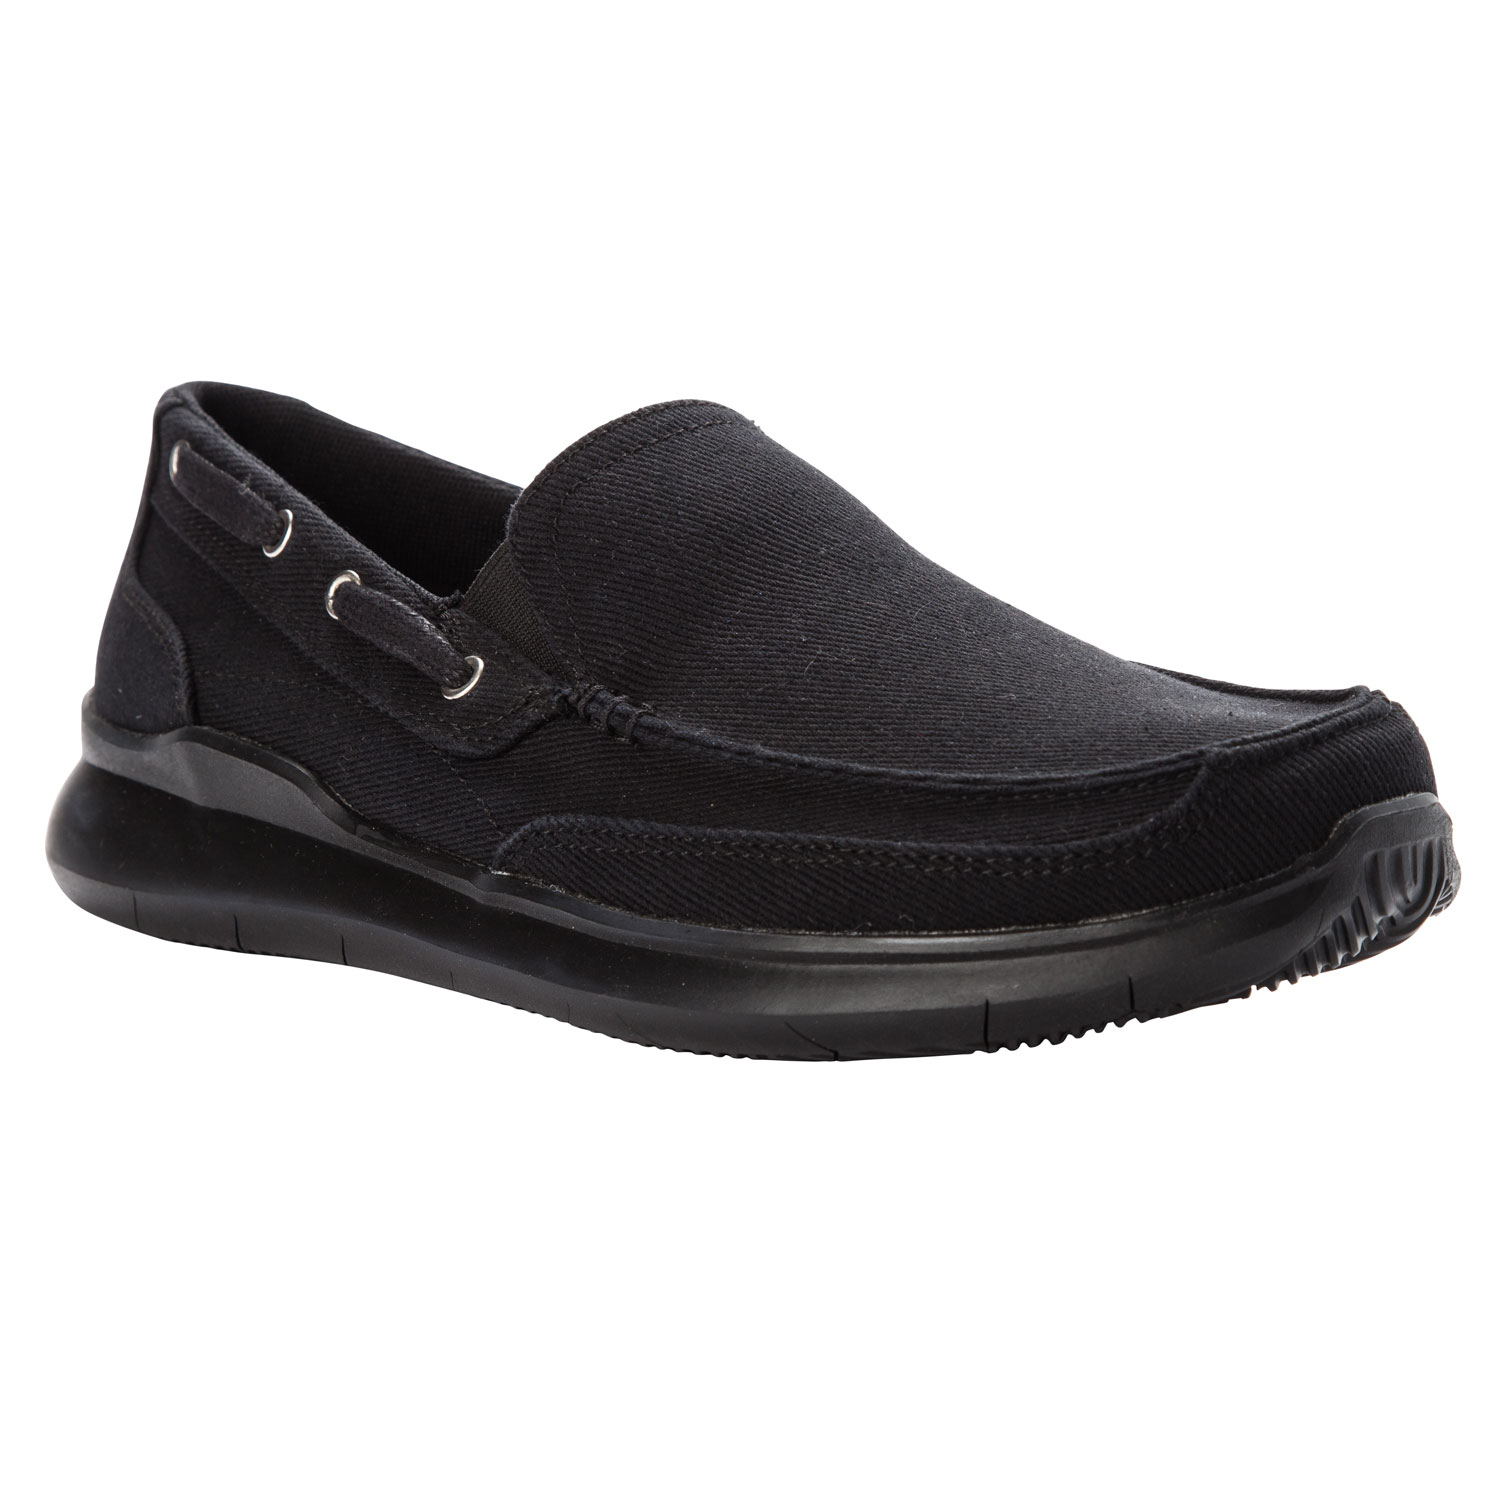 Propet Sawyer men's casual shoes with 